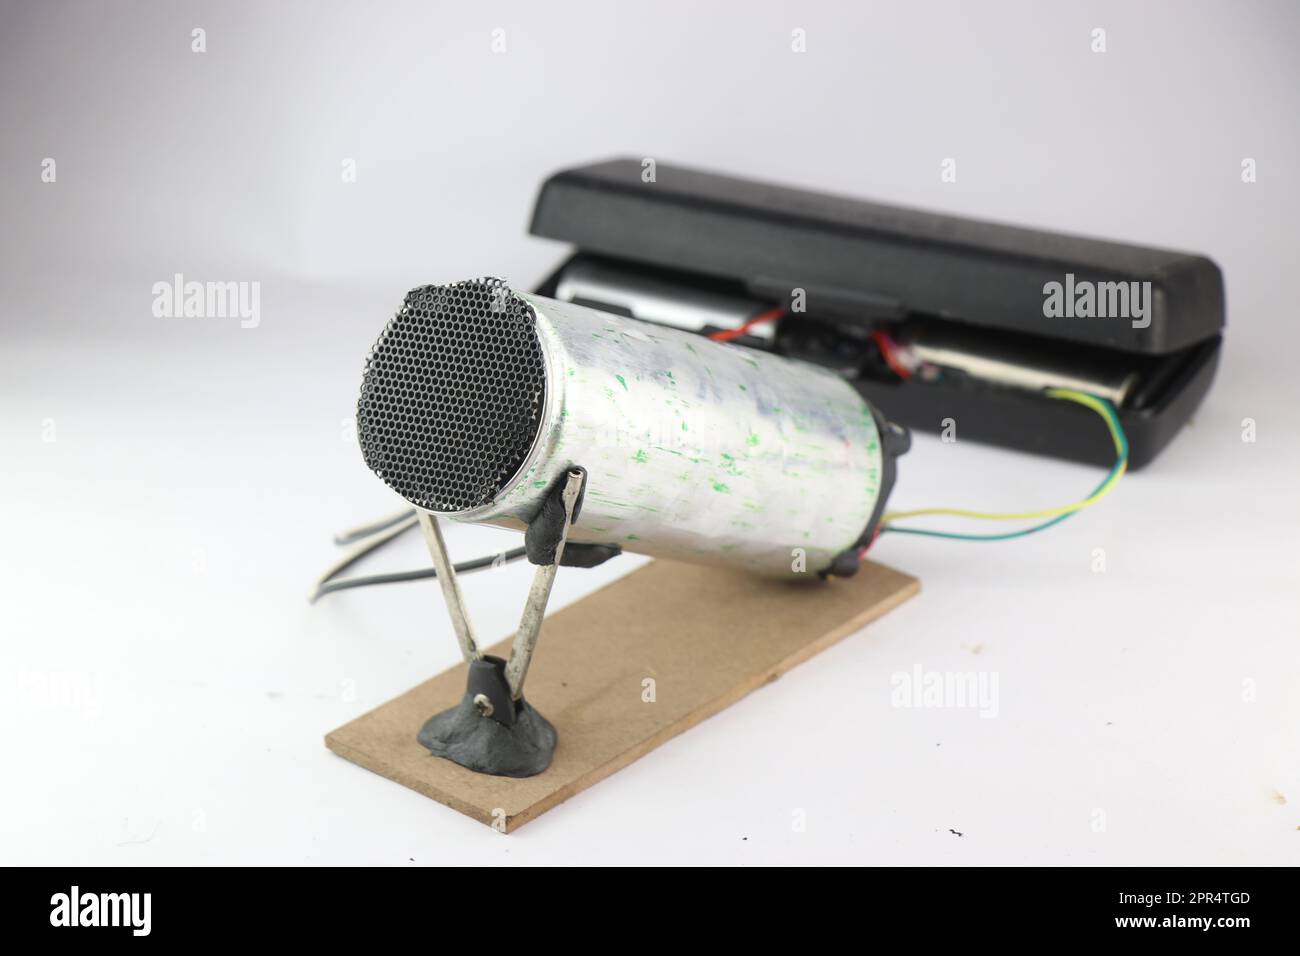 Air heating device made using recycled materials and heating element powered by the battery on a white background. Homemade inventions Stock Photo